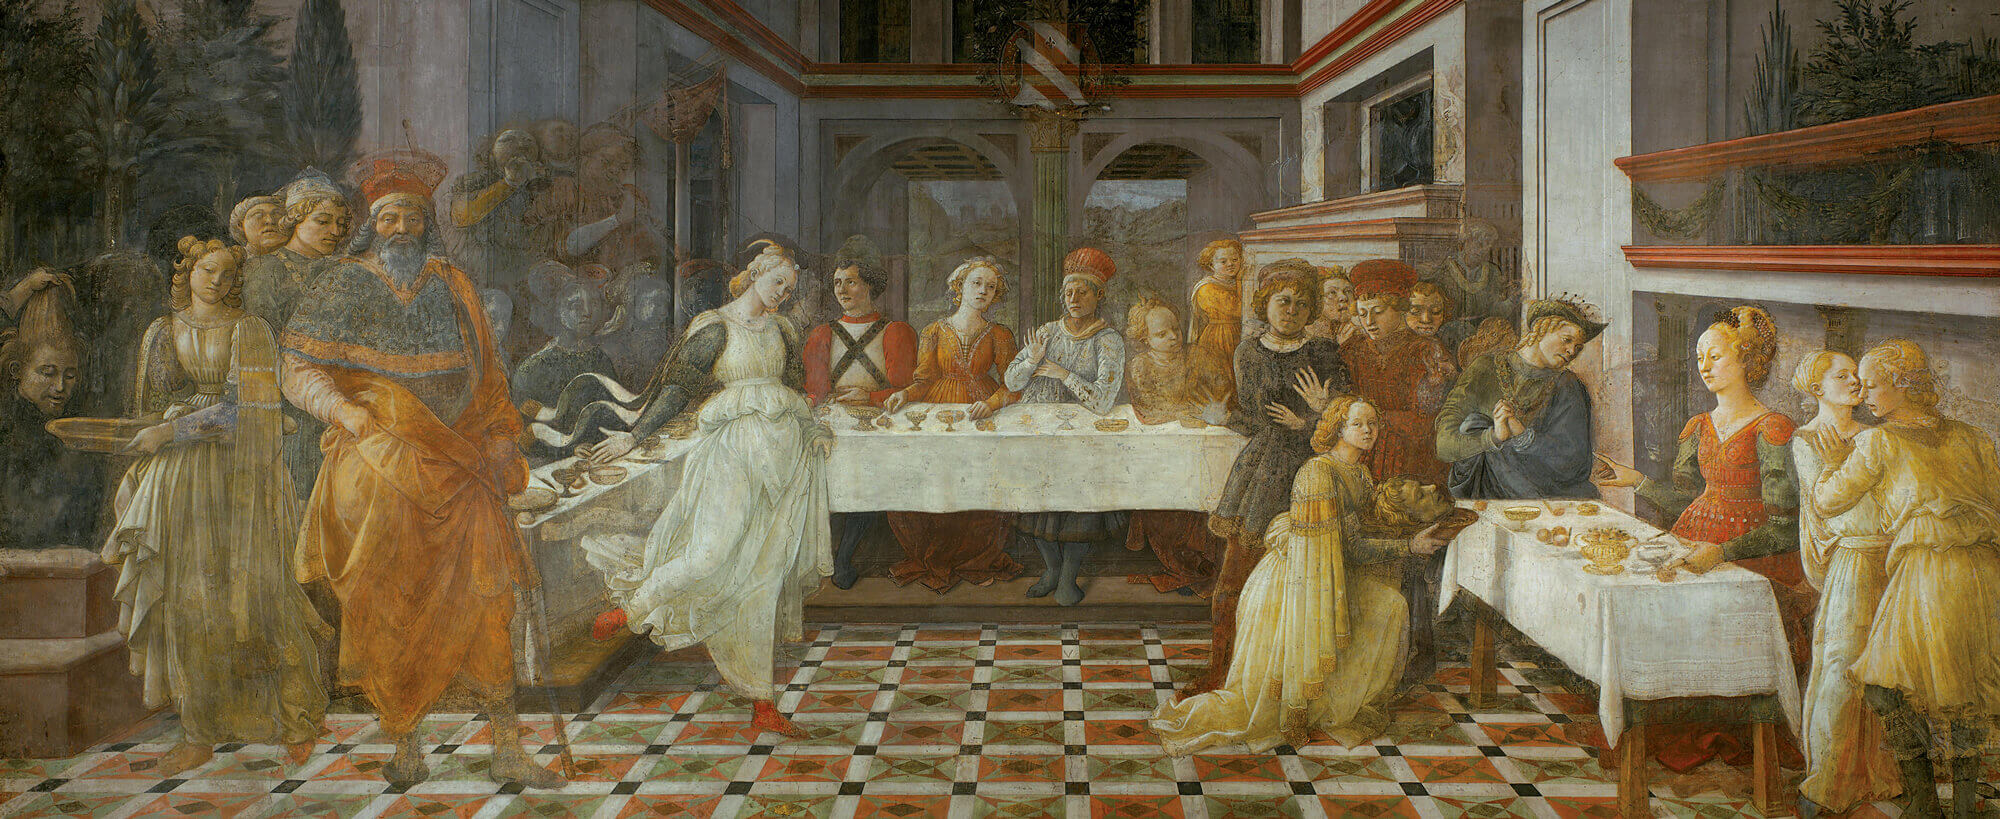 A fourteen fifty two to fourteen sixty six painting by Filippo Lippi “Herod’s Feast,” from “Scenes from the Life of Saint John the Baptist.” The feast is a reference to the Gospel episode after the Beheading of Saint John the Baptist, when Salome presents his head to her parents.